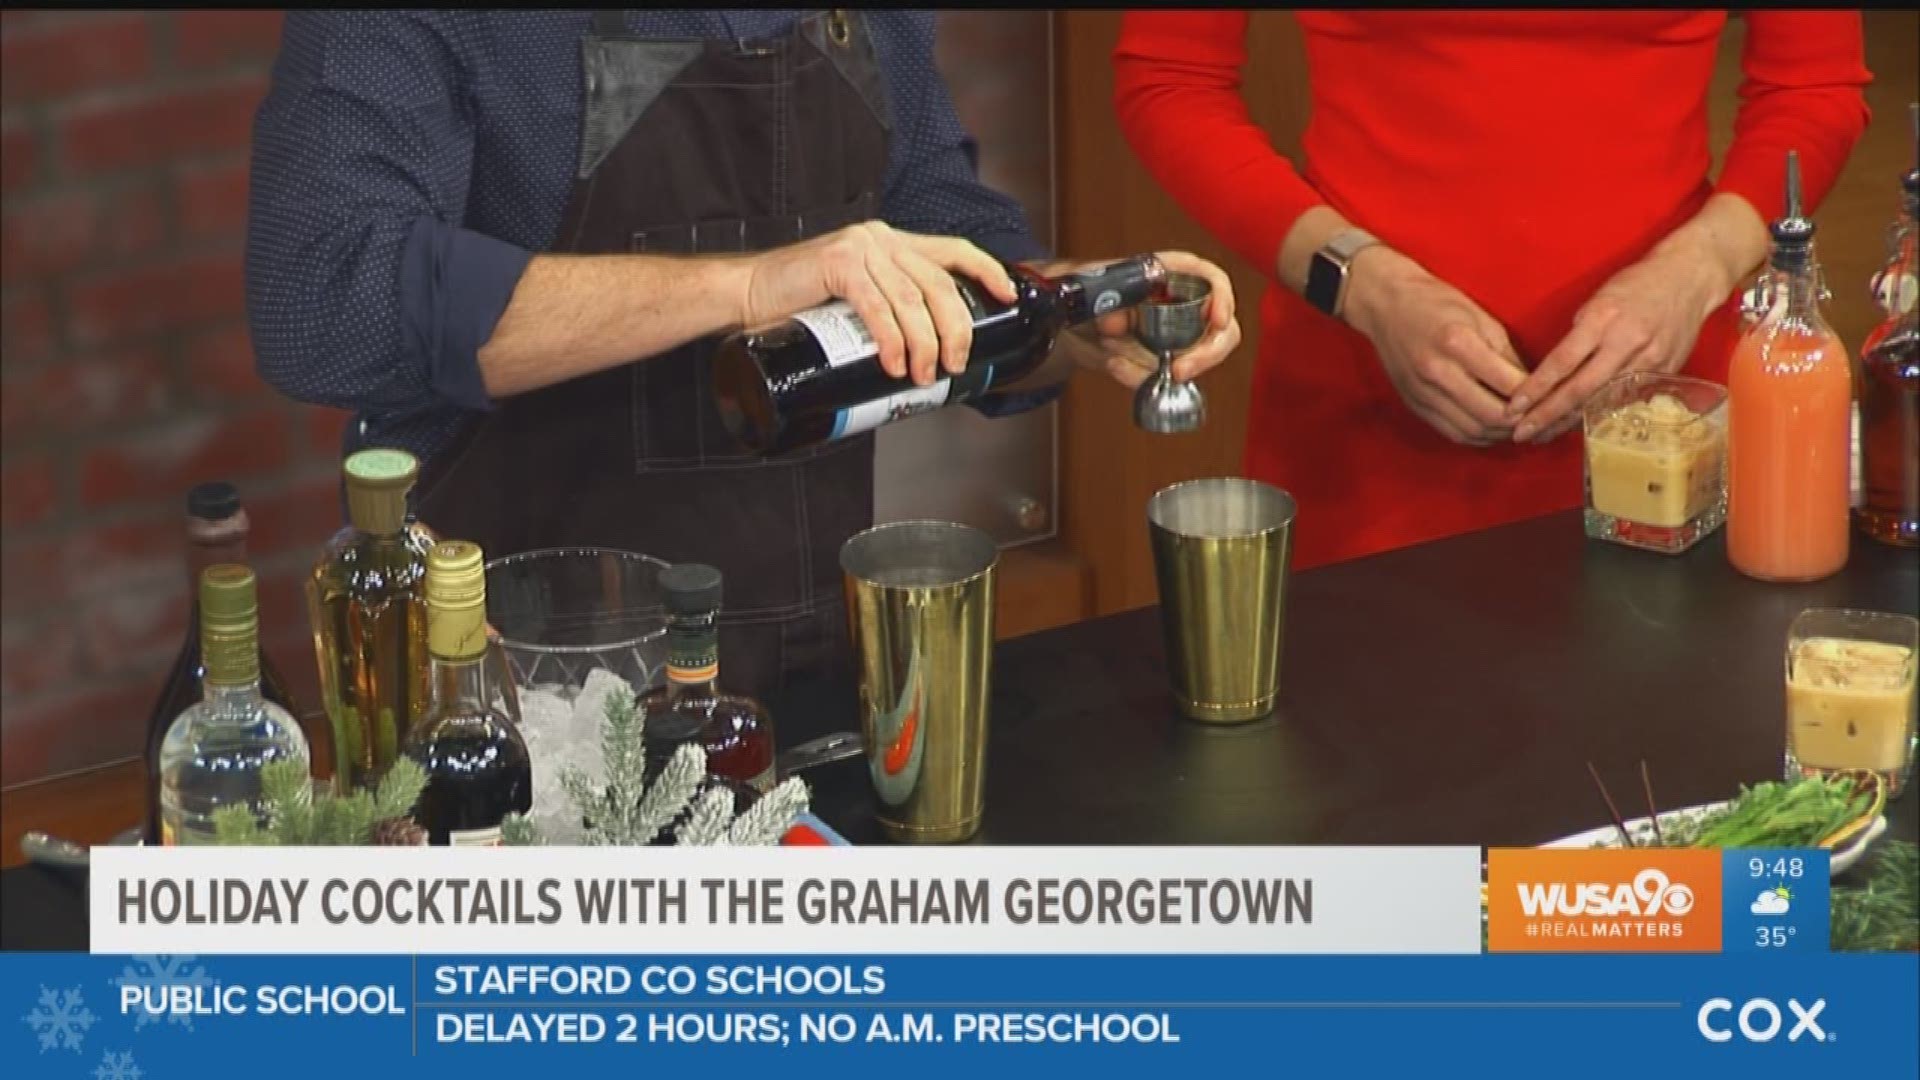 Andrew Lamkin, lead bartender at The Graham Georgetown has a few tasty cocktails that are perfect for the holidays.